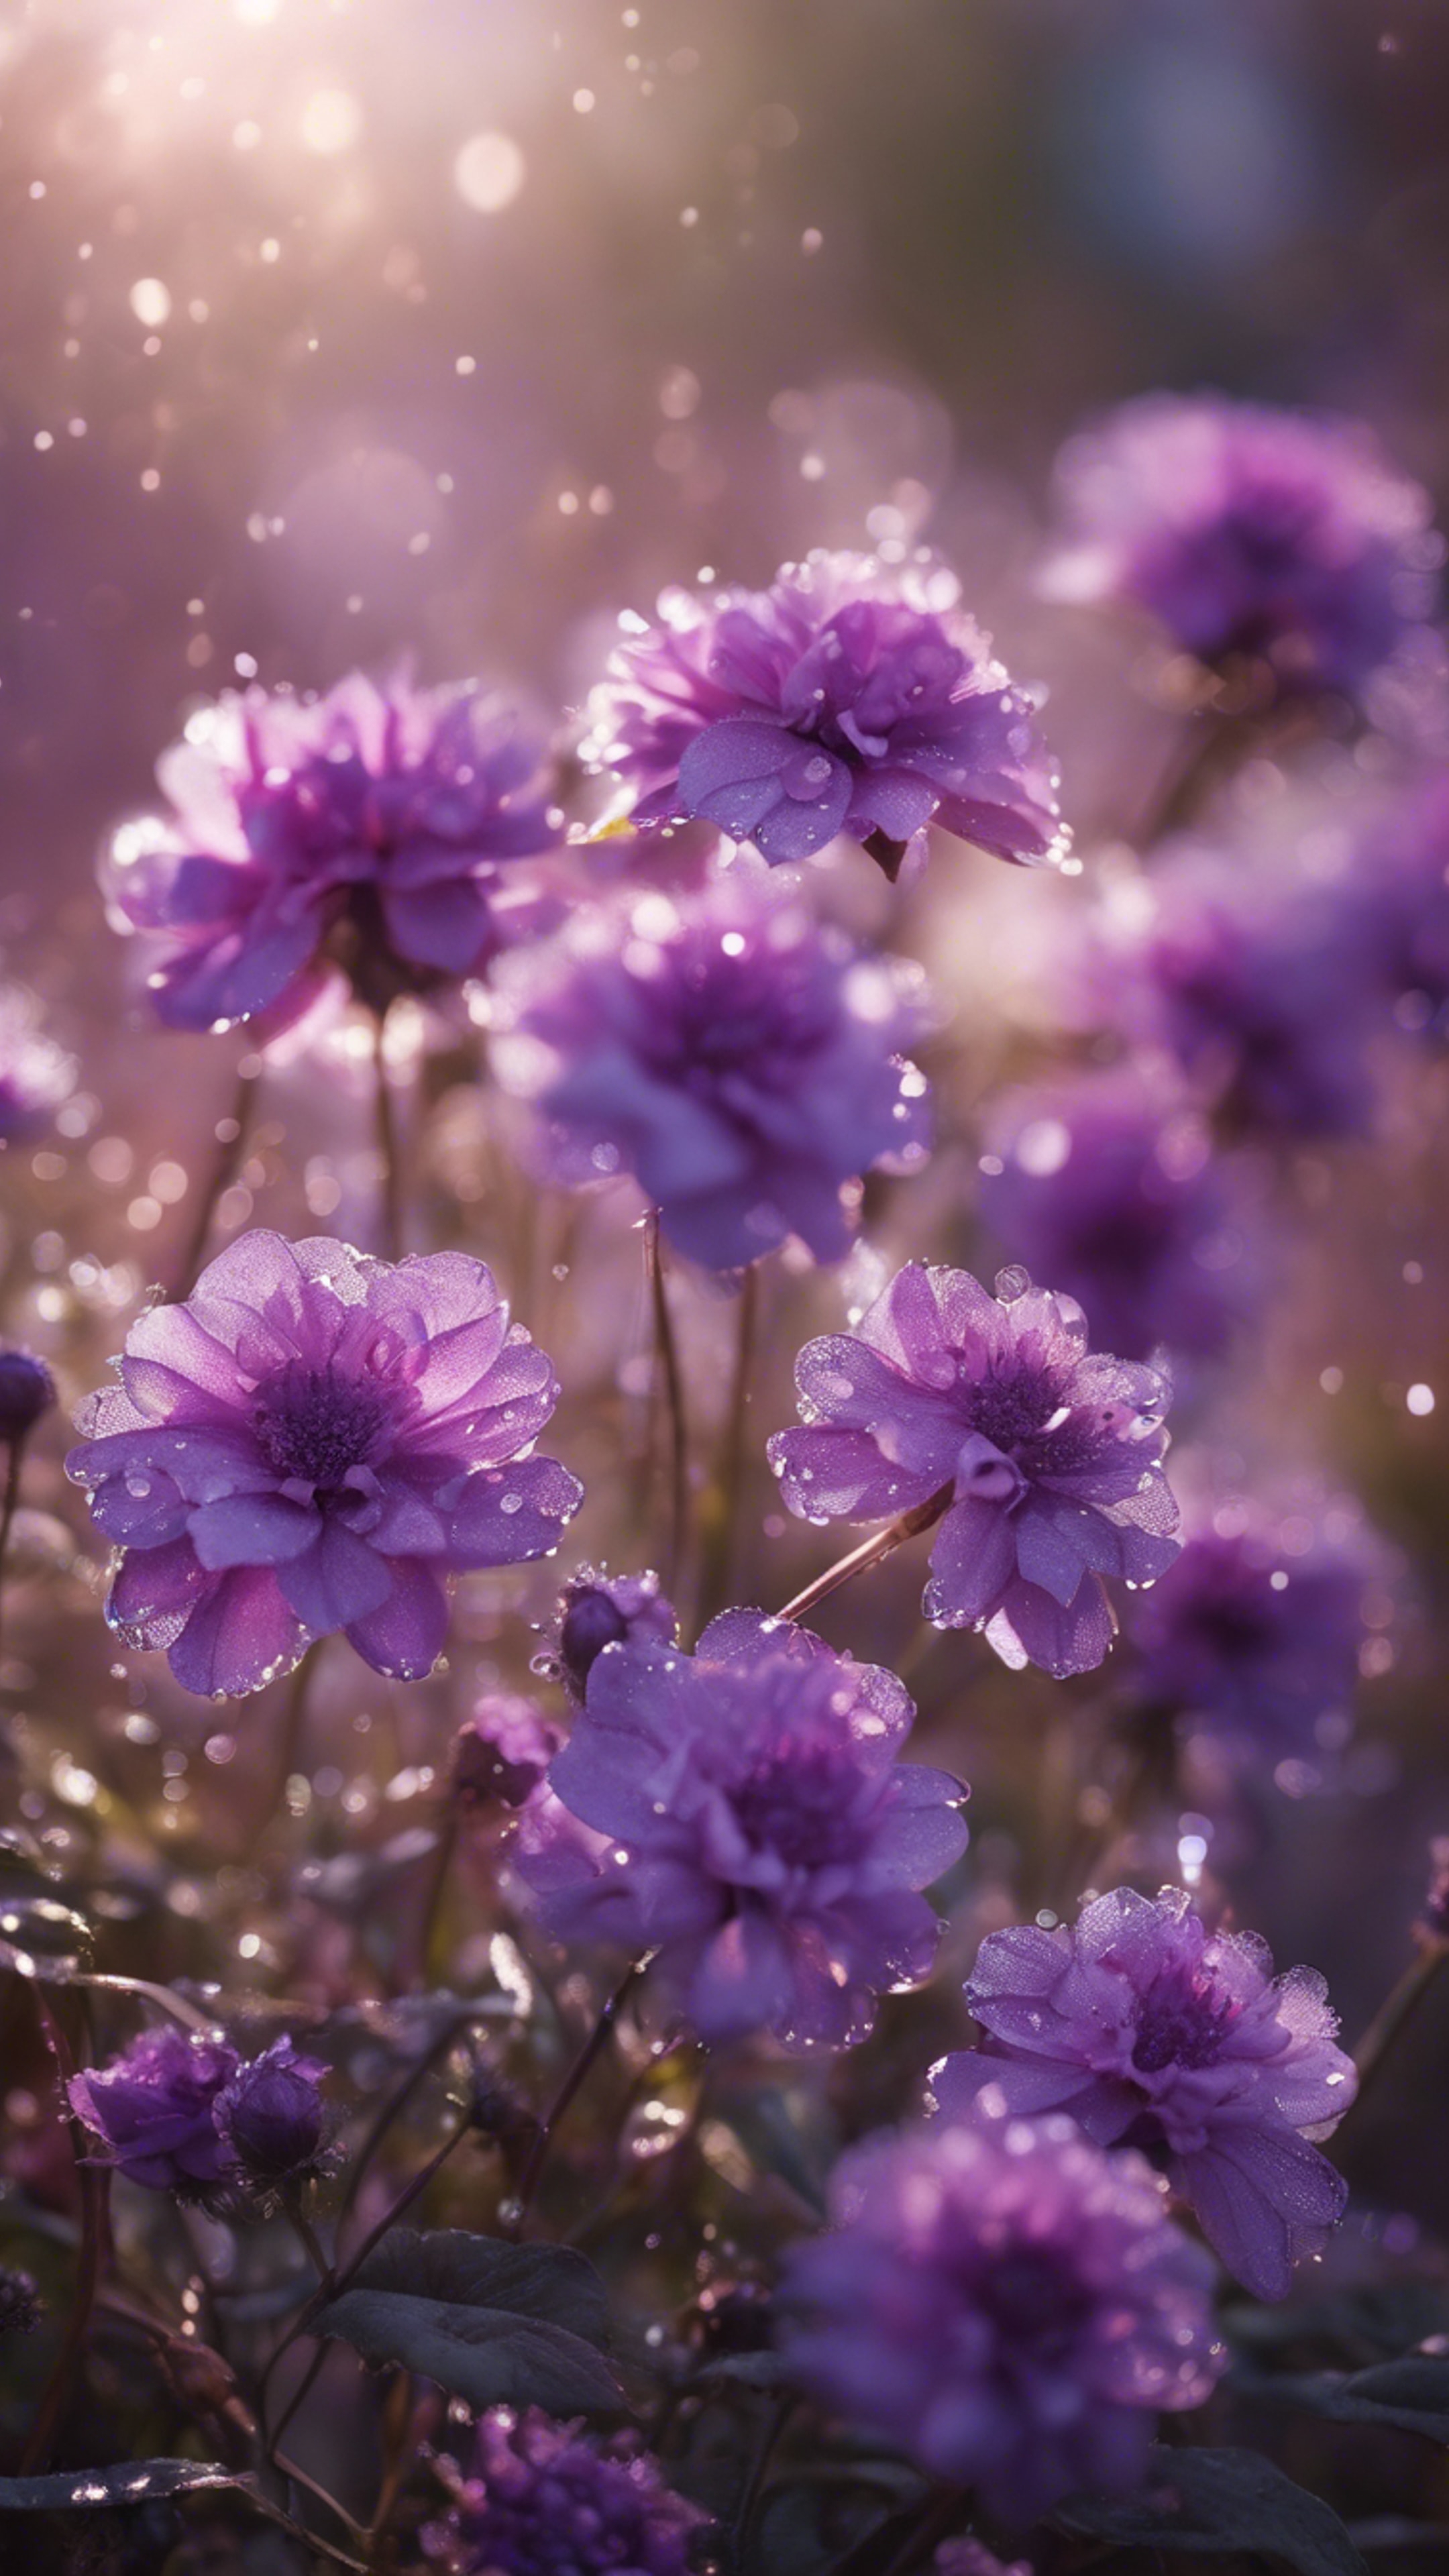 An impressive collage of purple flowers in full bloom, highlighted by sparkling morning dew.壁紙[23d1df20d4e341739cf3]